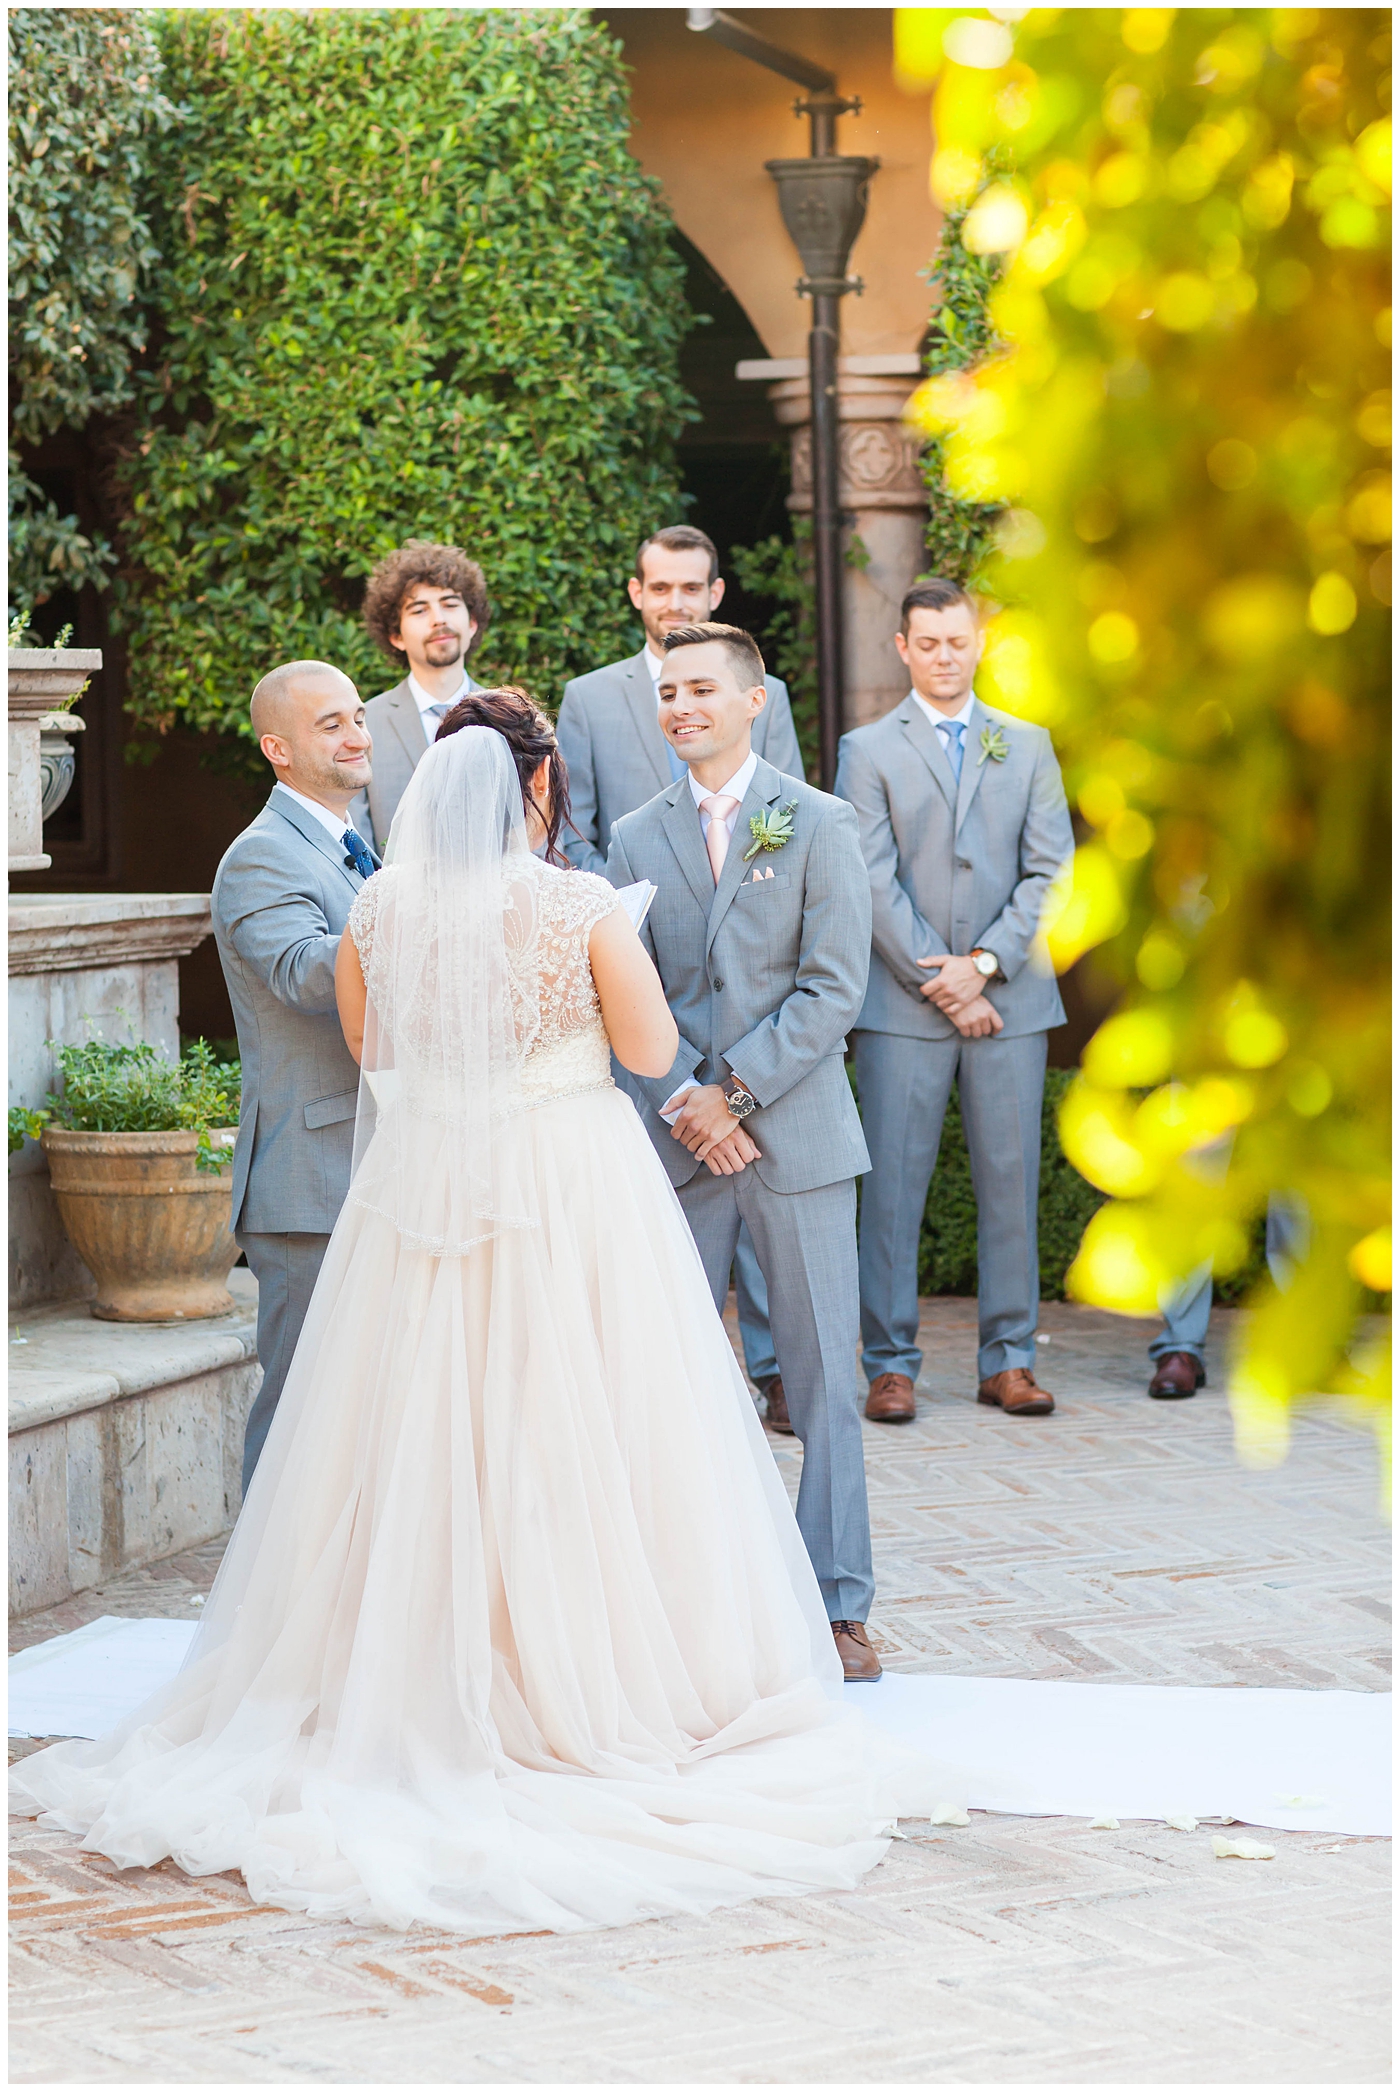 Bride and Groom during ceremony in Tuscan Courtyard